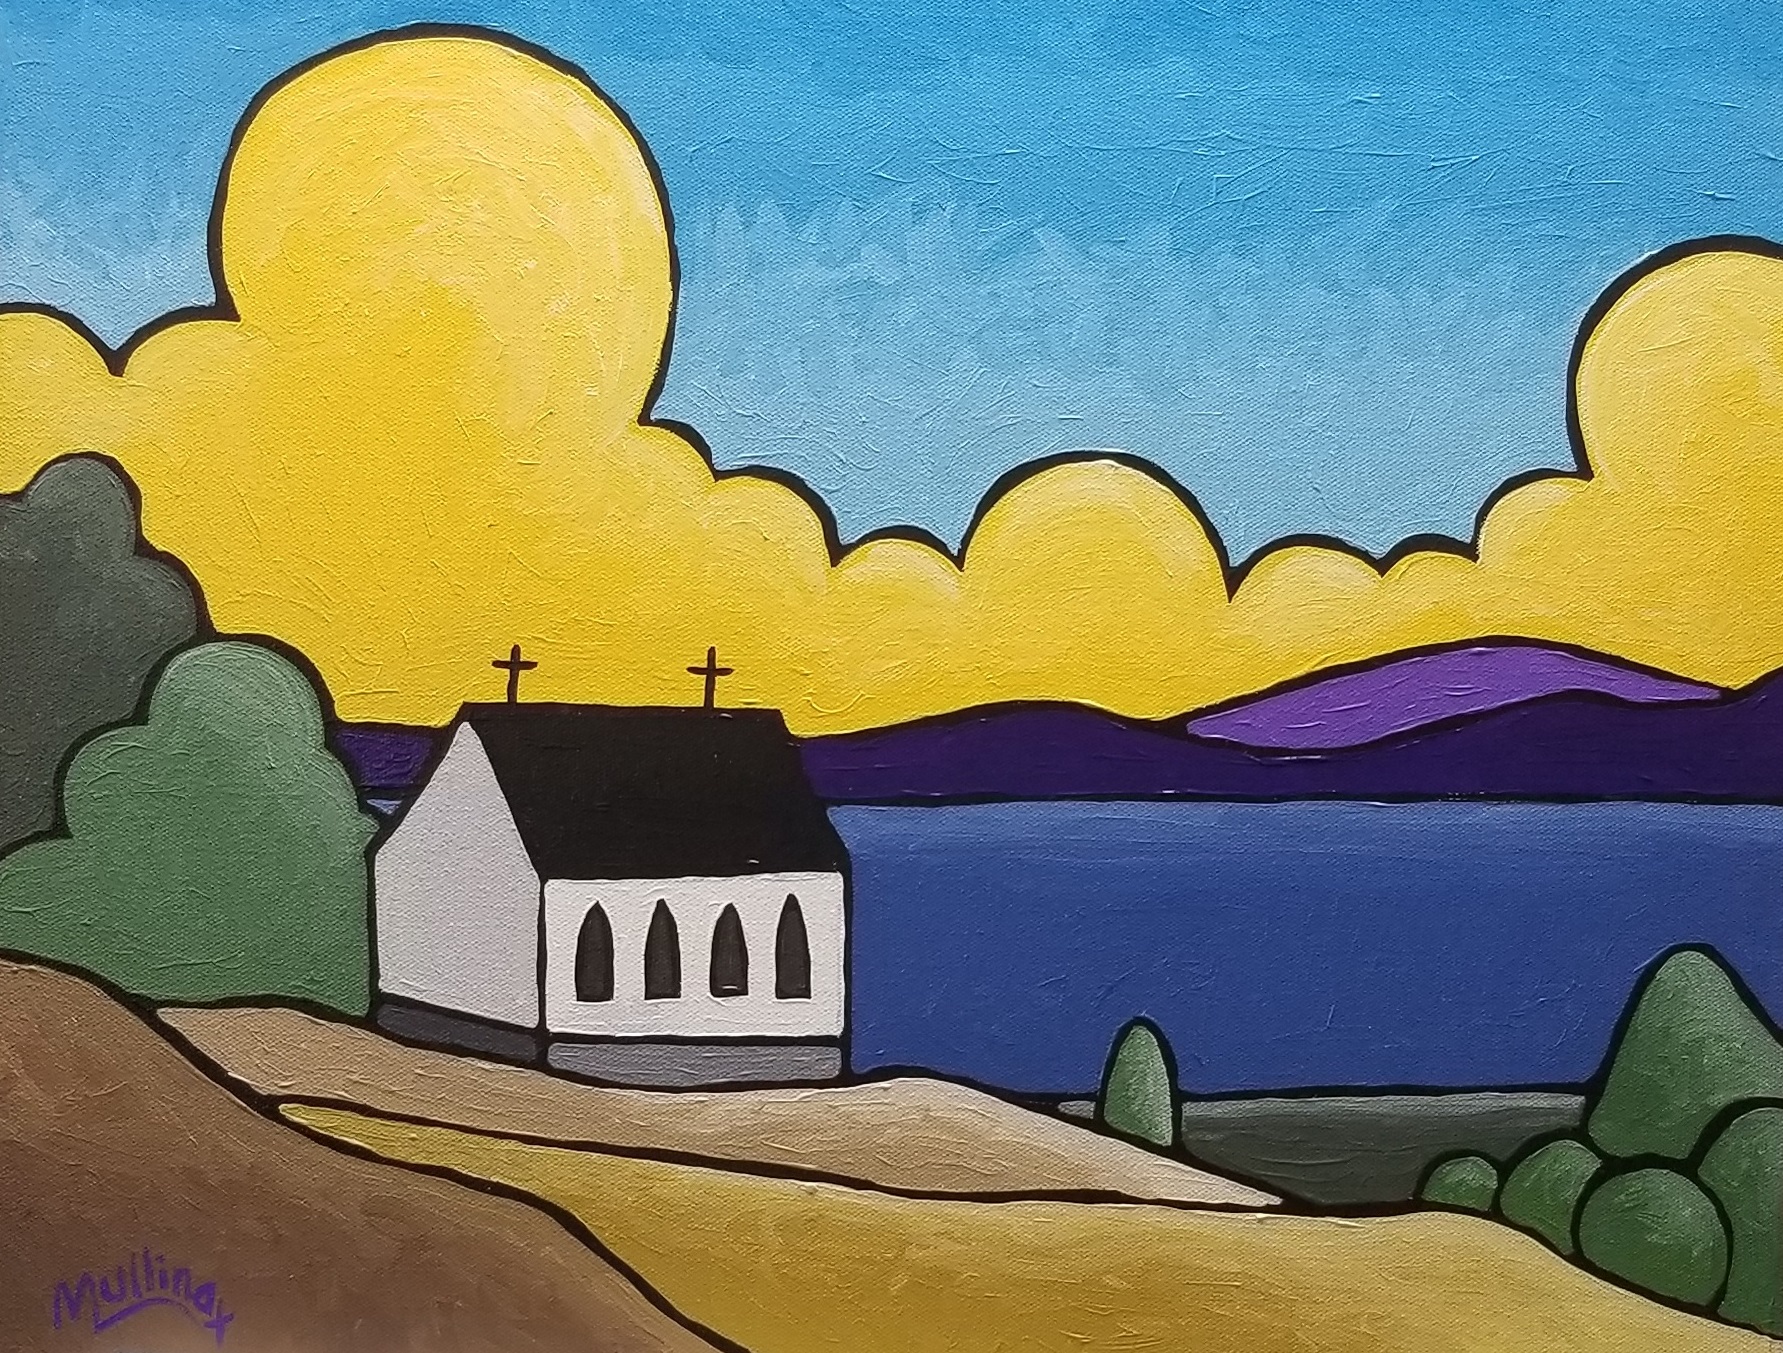 Old Saint Hilary’s Church | Painting by Kent Mullinax of Cartersville, Georgia | A painting of a white church at the edge of a blue lake with purple mountains, majestic yellow clouds, and a blue sky in the background